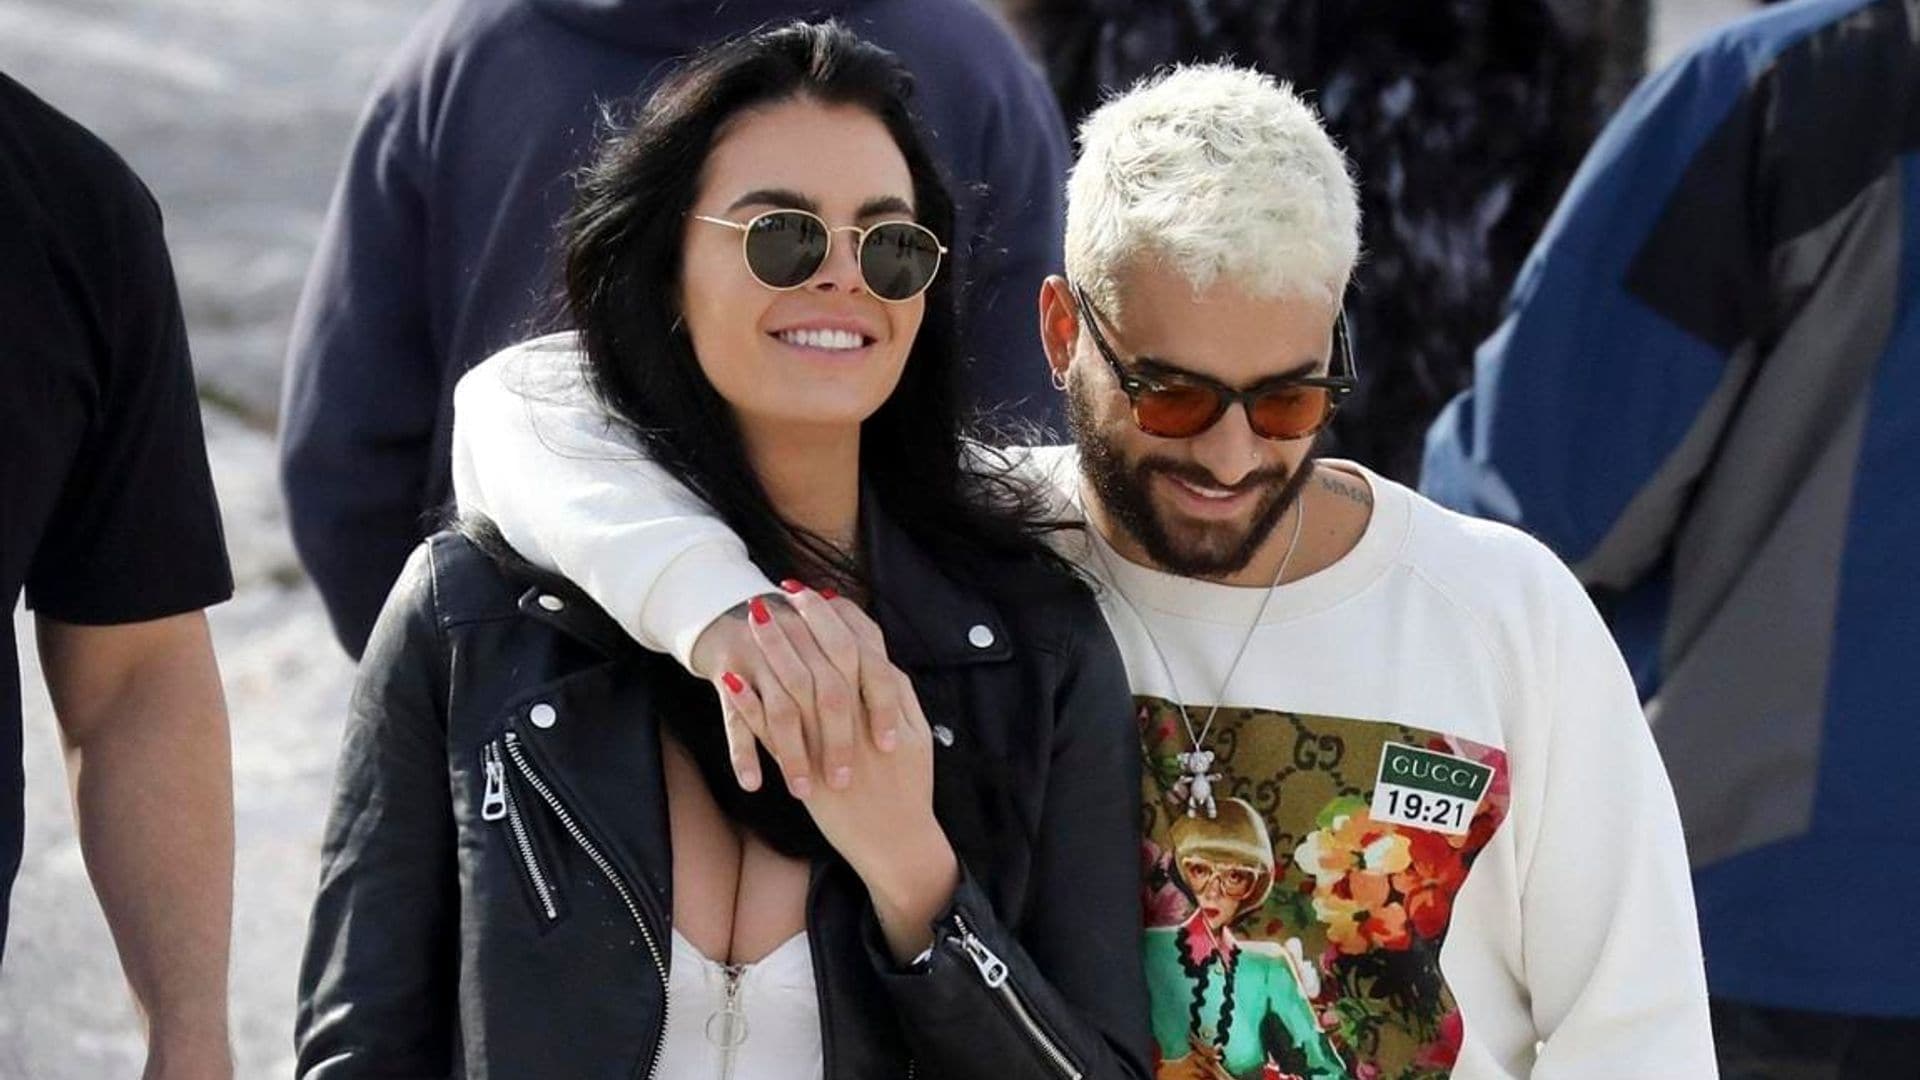 Maluma and new girlfriend Vivien Rubin have a romantic date in Greece- see the photos